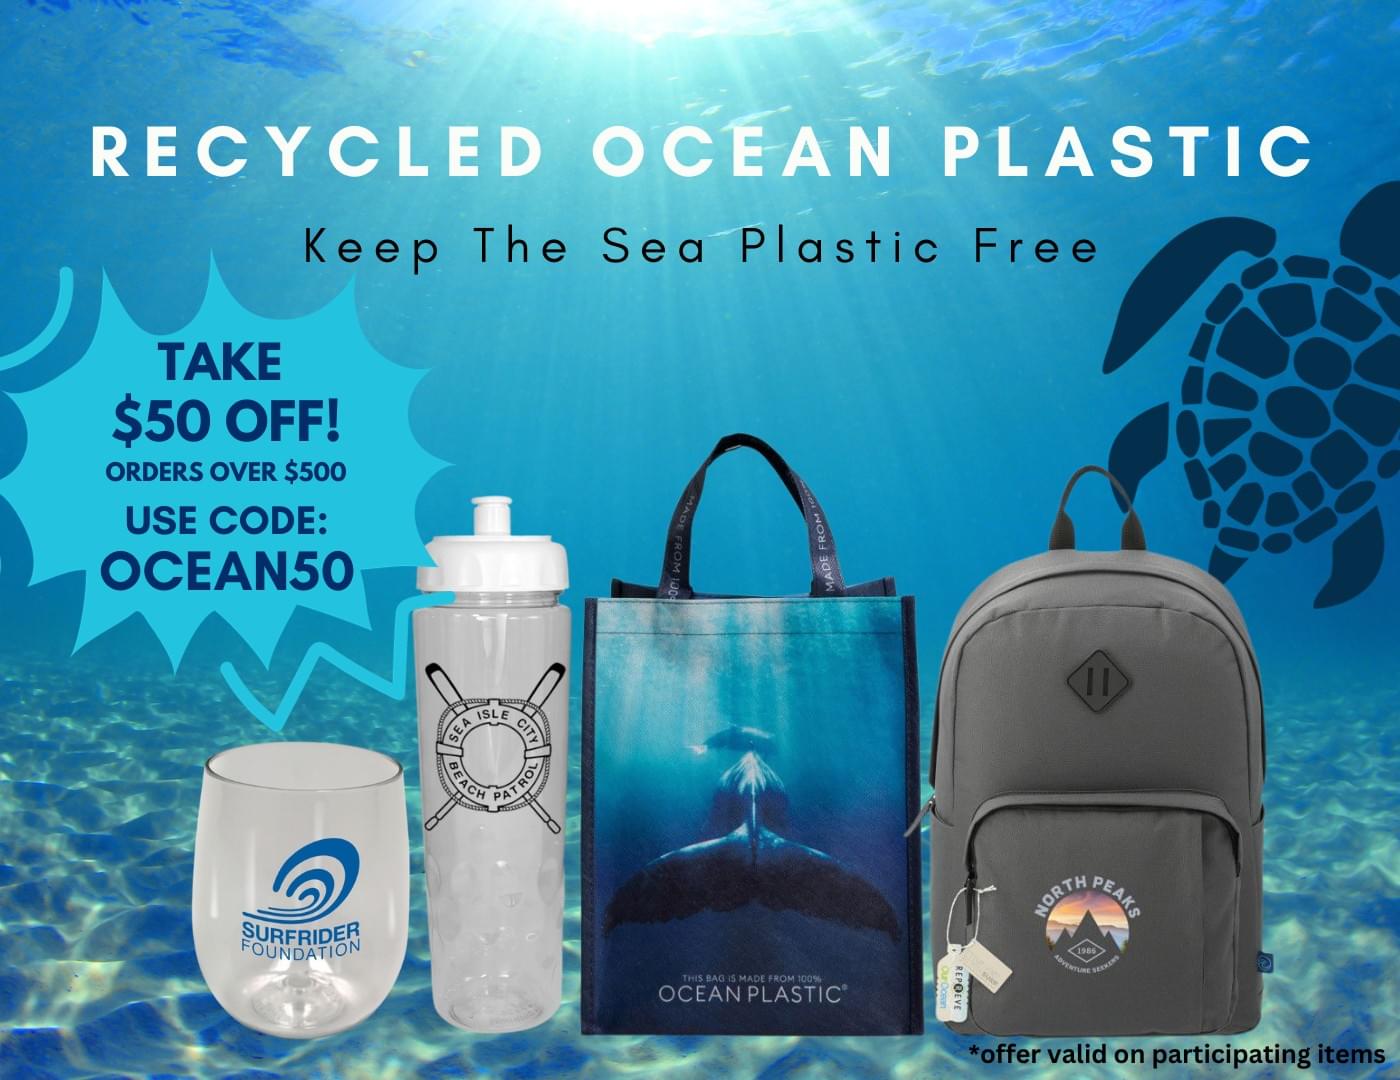 Introducing New Ocean Plastic Recycled Products 🐬 - 4 All Promos